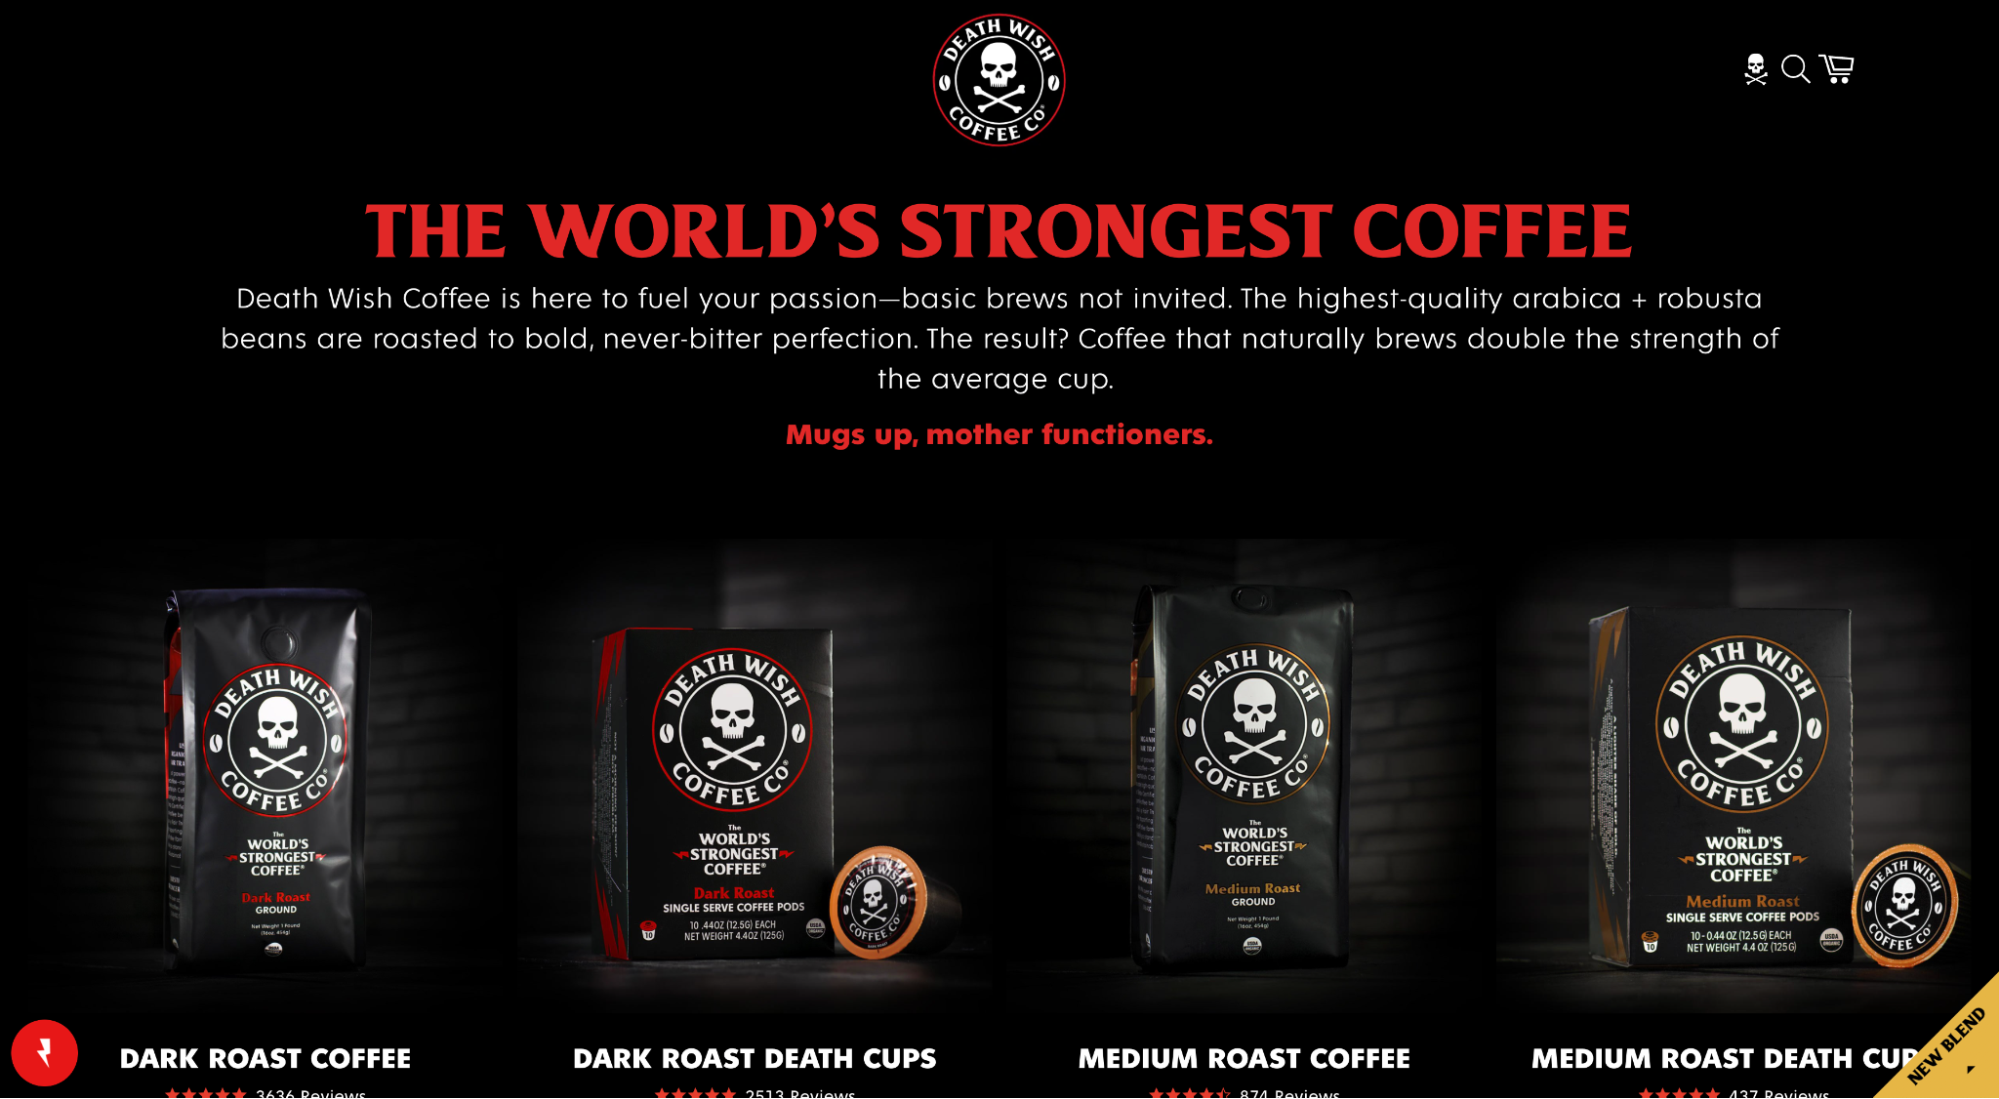 Death Wish Coffee Co. value proposition